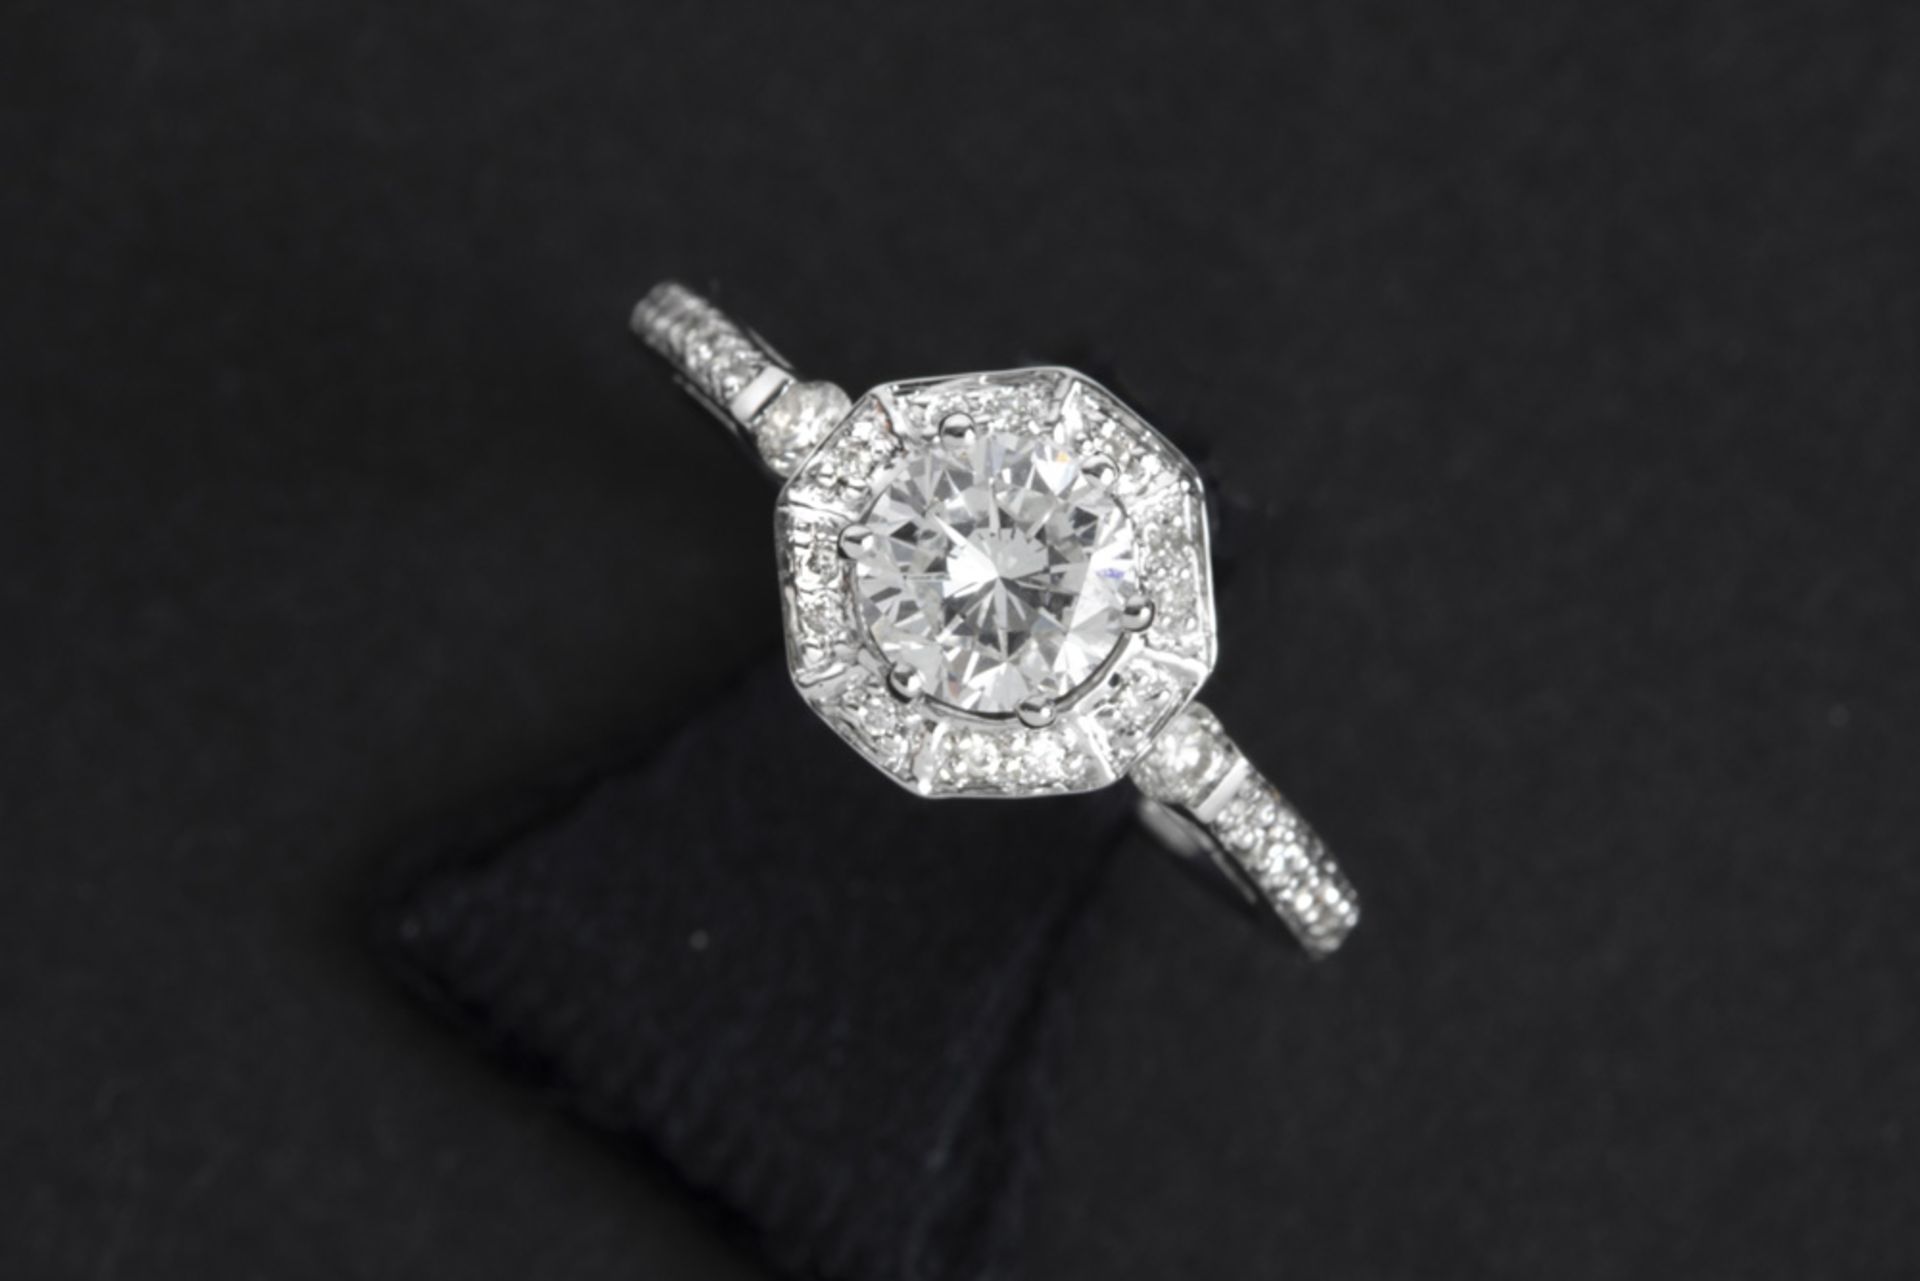 a 0,72 carat high quality brilliant cut diamond set in a ring in white gold (18 carat) with ca 0,